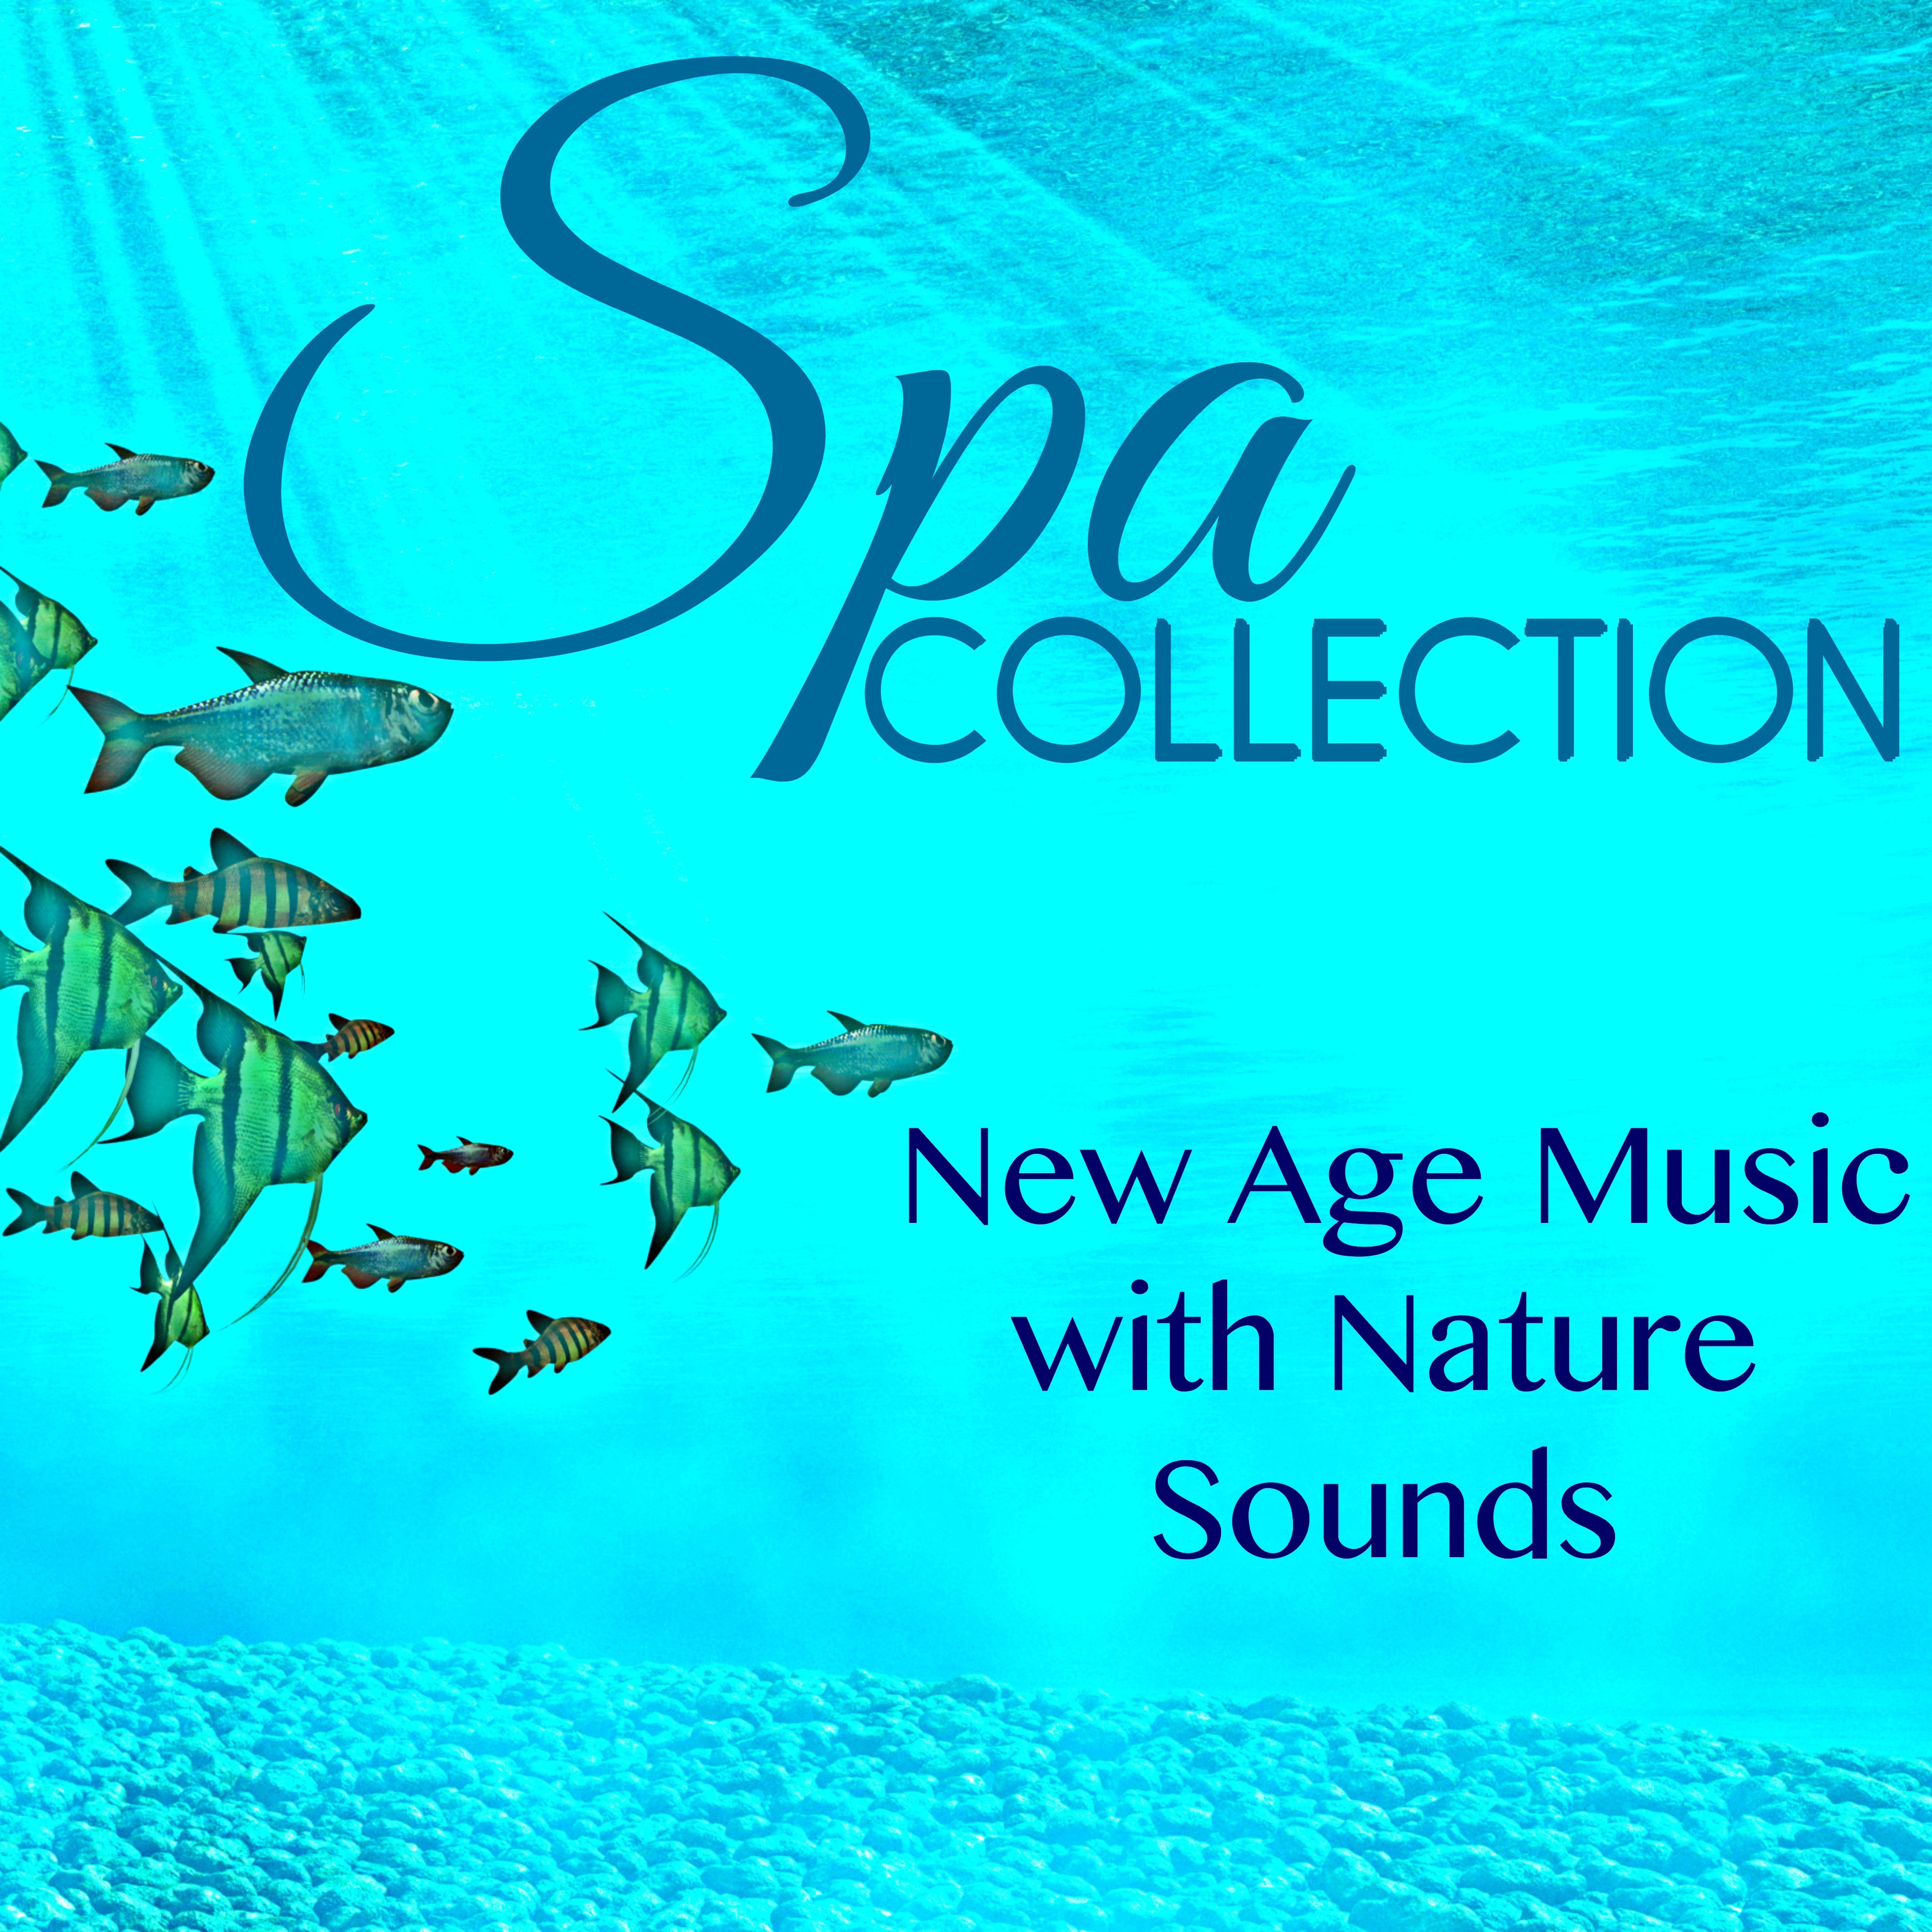 Spa Collection - New Age Music with Nature Sounds & Wonderful Chill Out Songs for Massage, Well-Being, Relaxation & Vital Energy, Meditation Spa Music Playlist